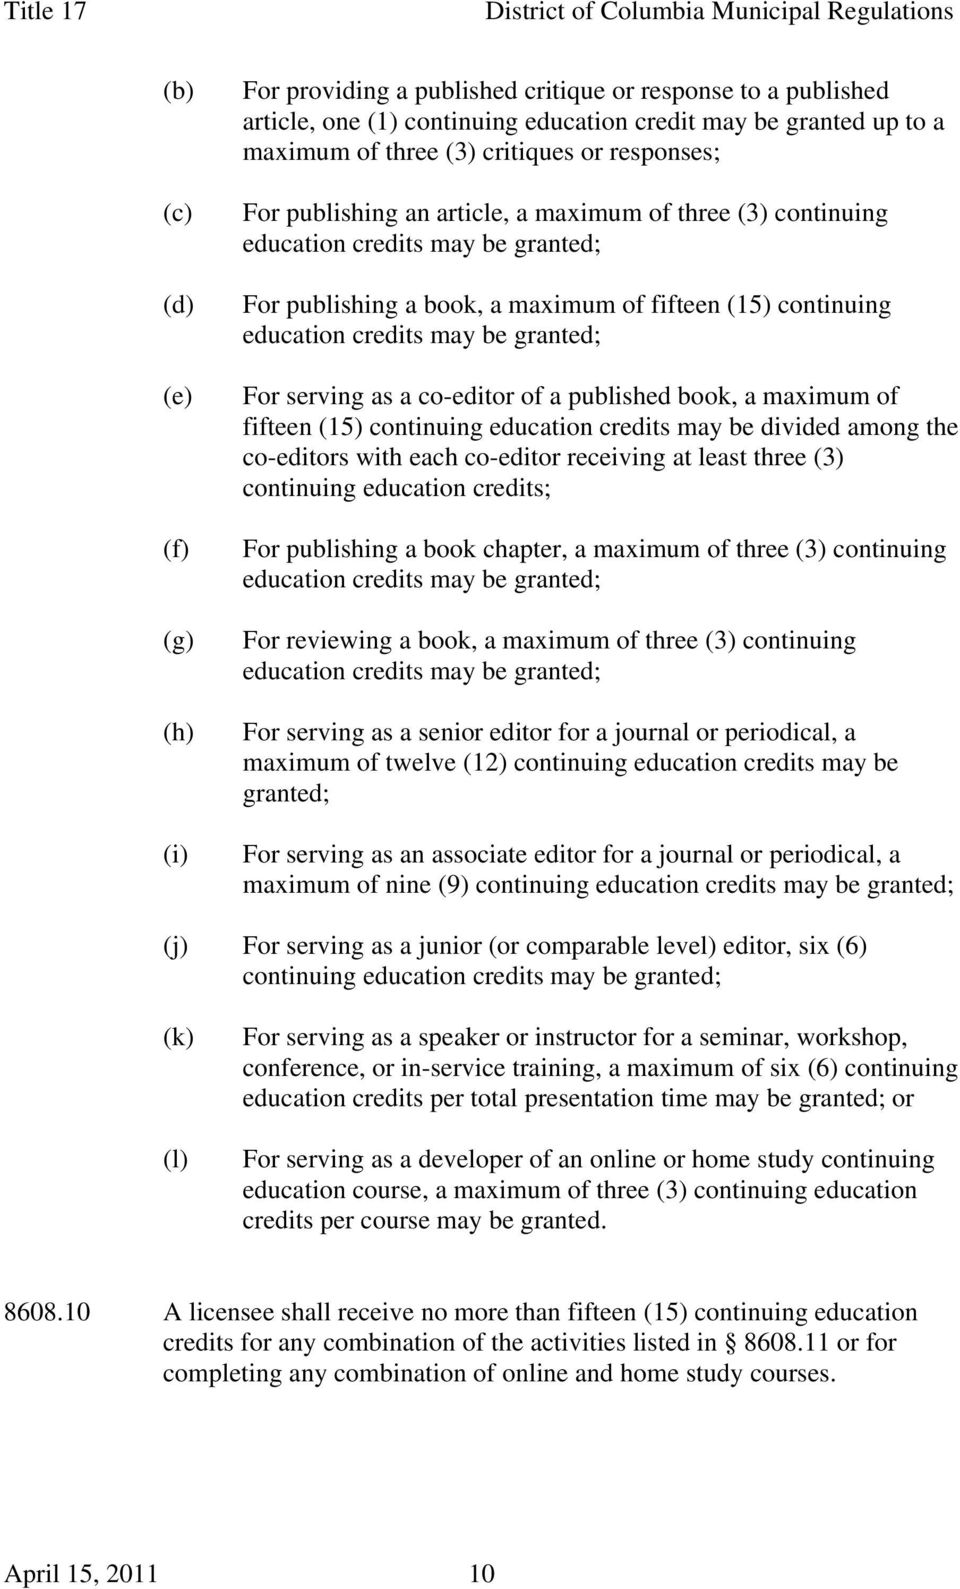 For serving as a co-editor of a published book, a maximum of fifteen (15) continuing education credits may be divided among the co-editors with each co-editor receiving at least three (3) continuing